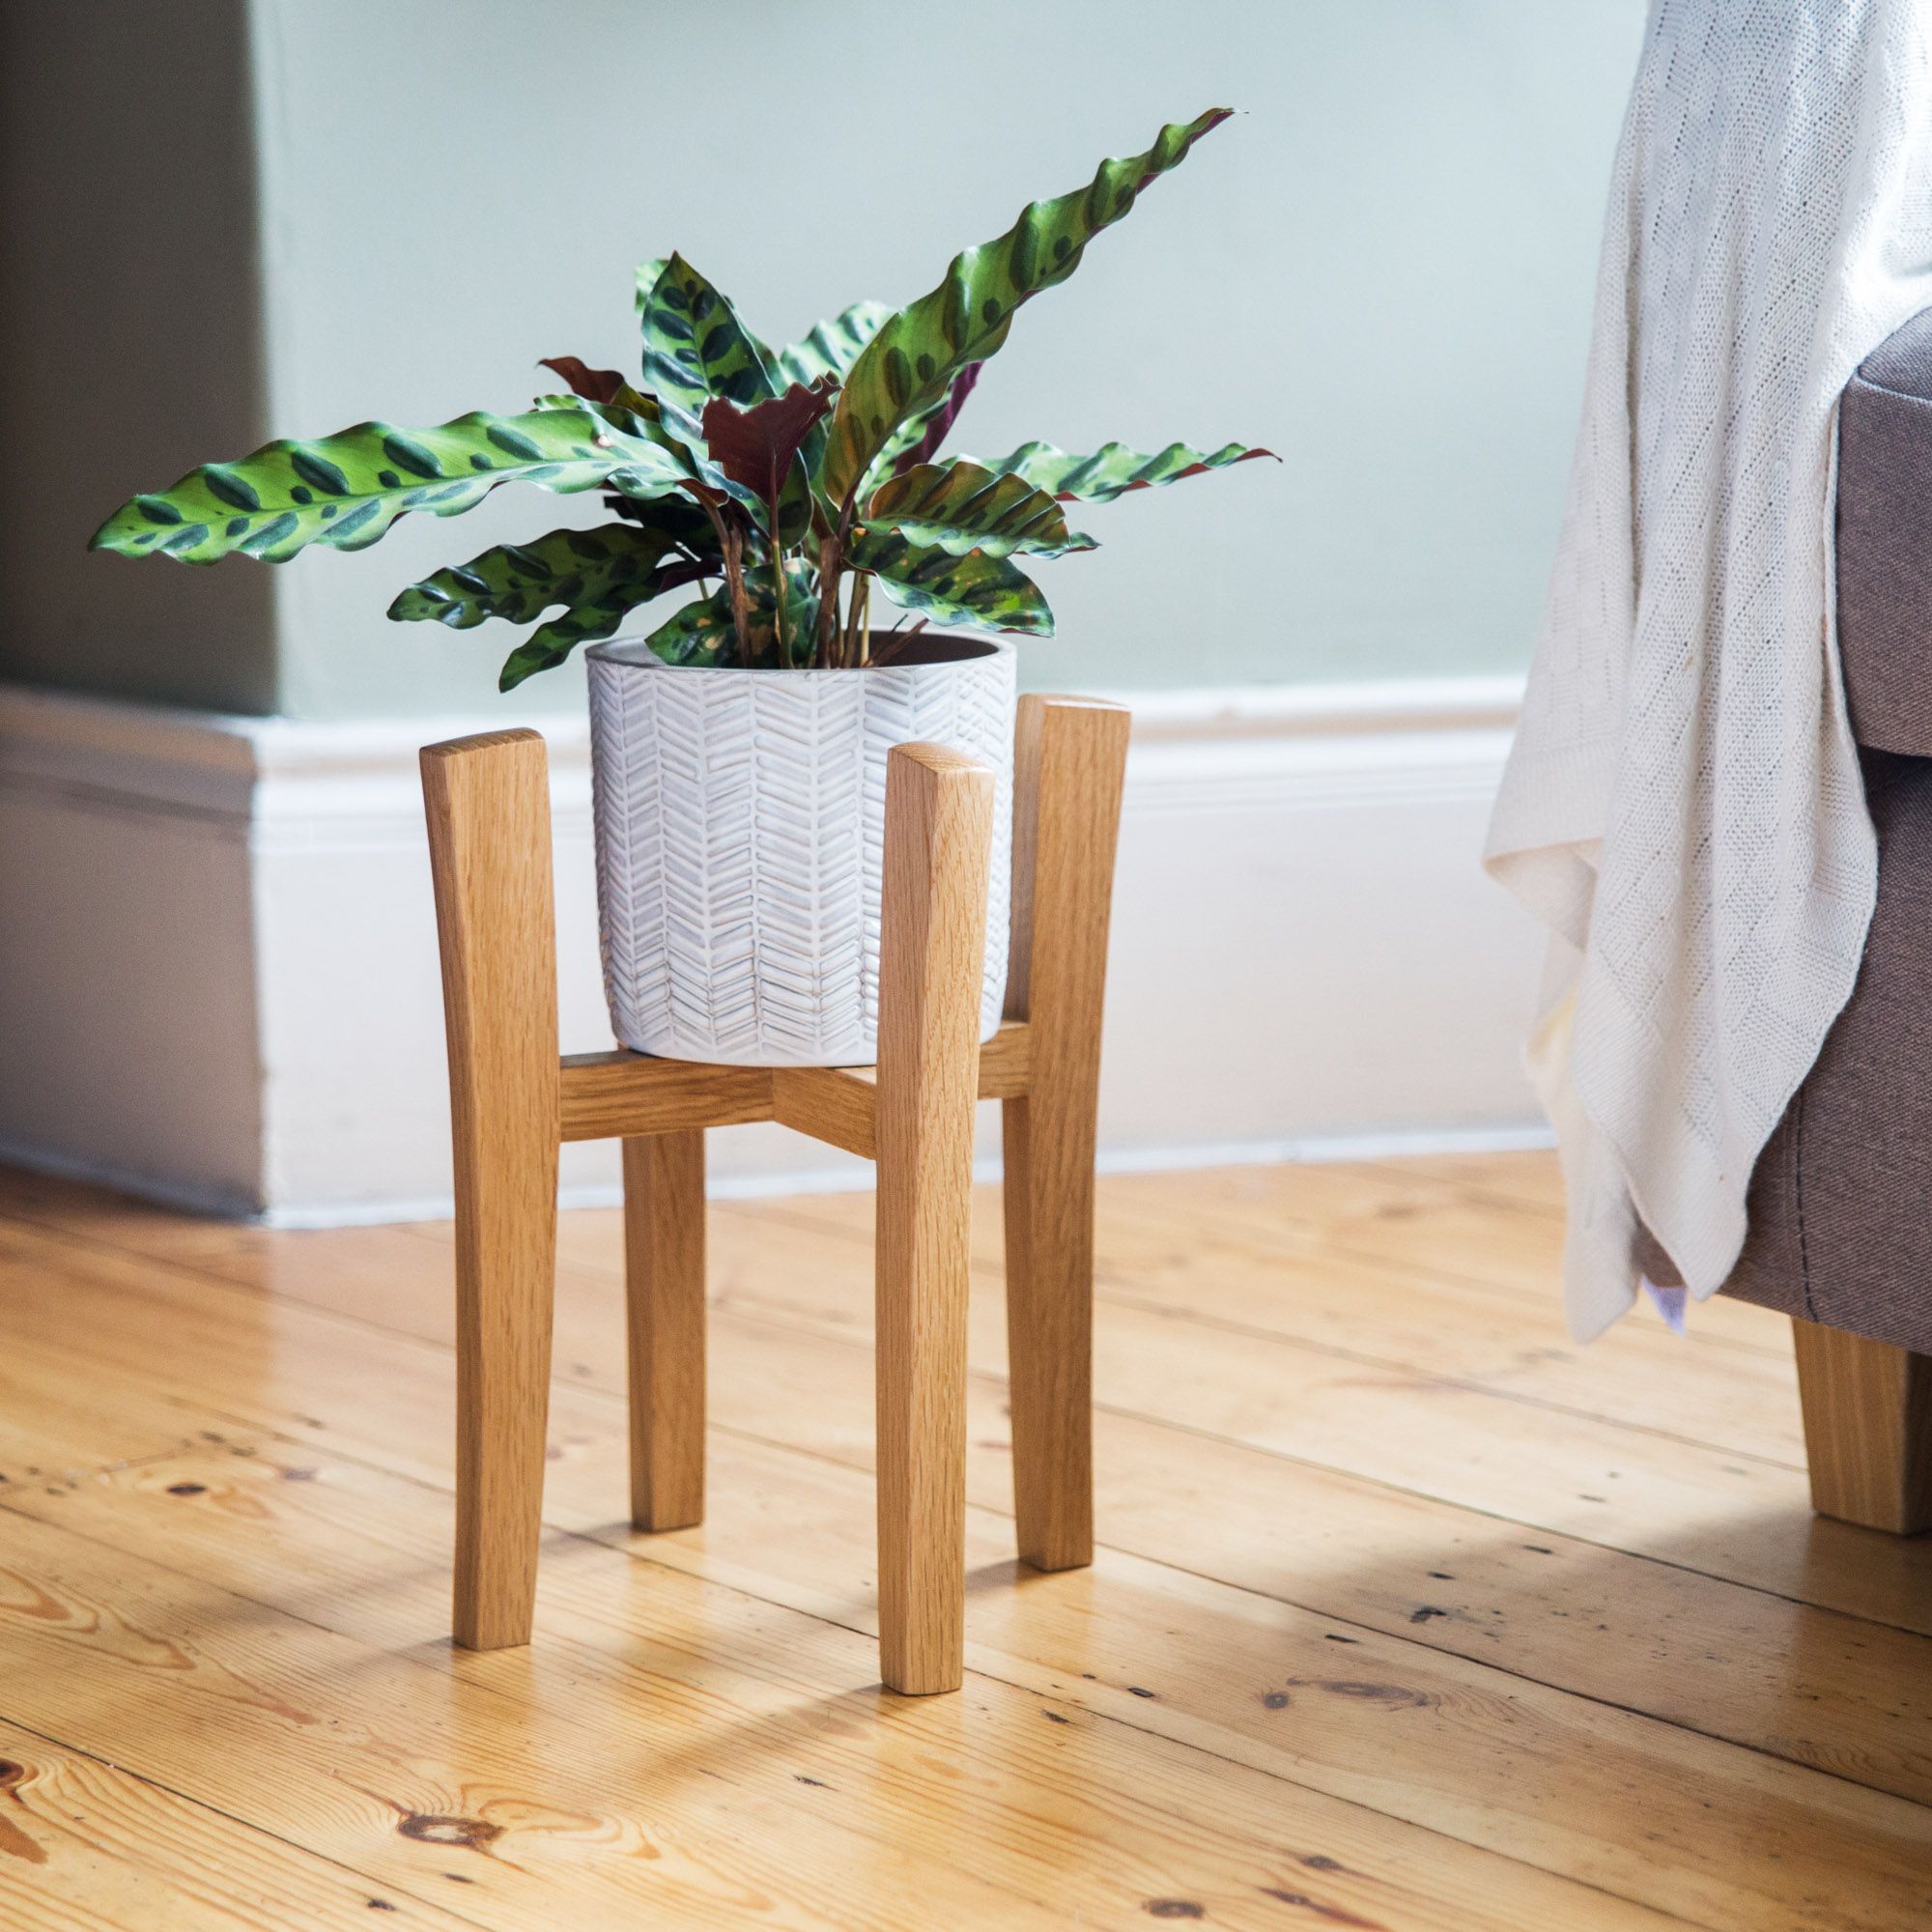 Wooden Plant Stands Throughout Most Popular Plant Stand – Handmade In Britain (View 7 of 10)